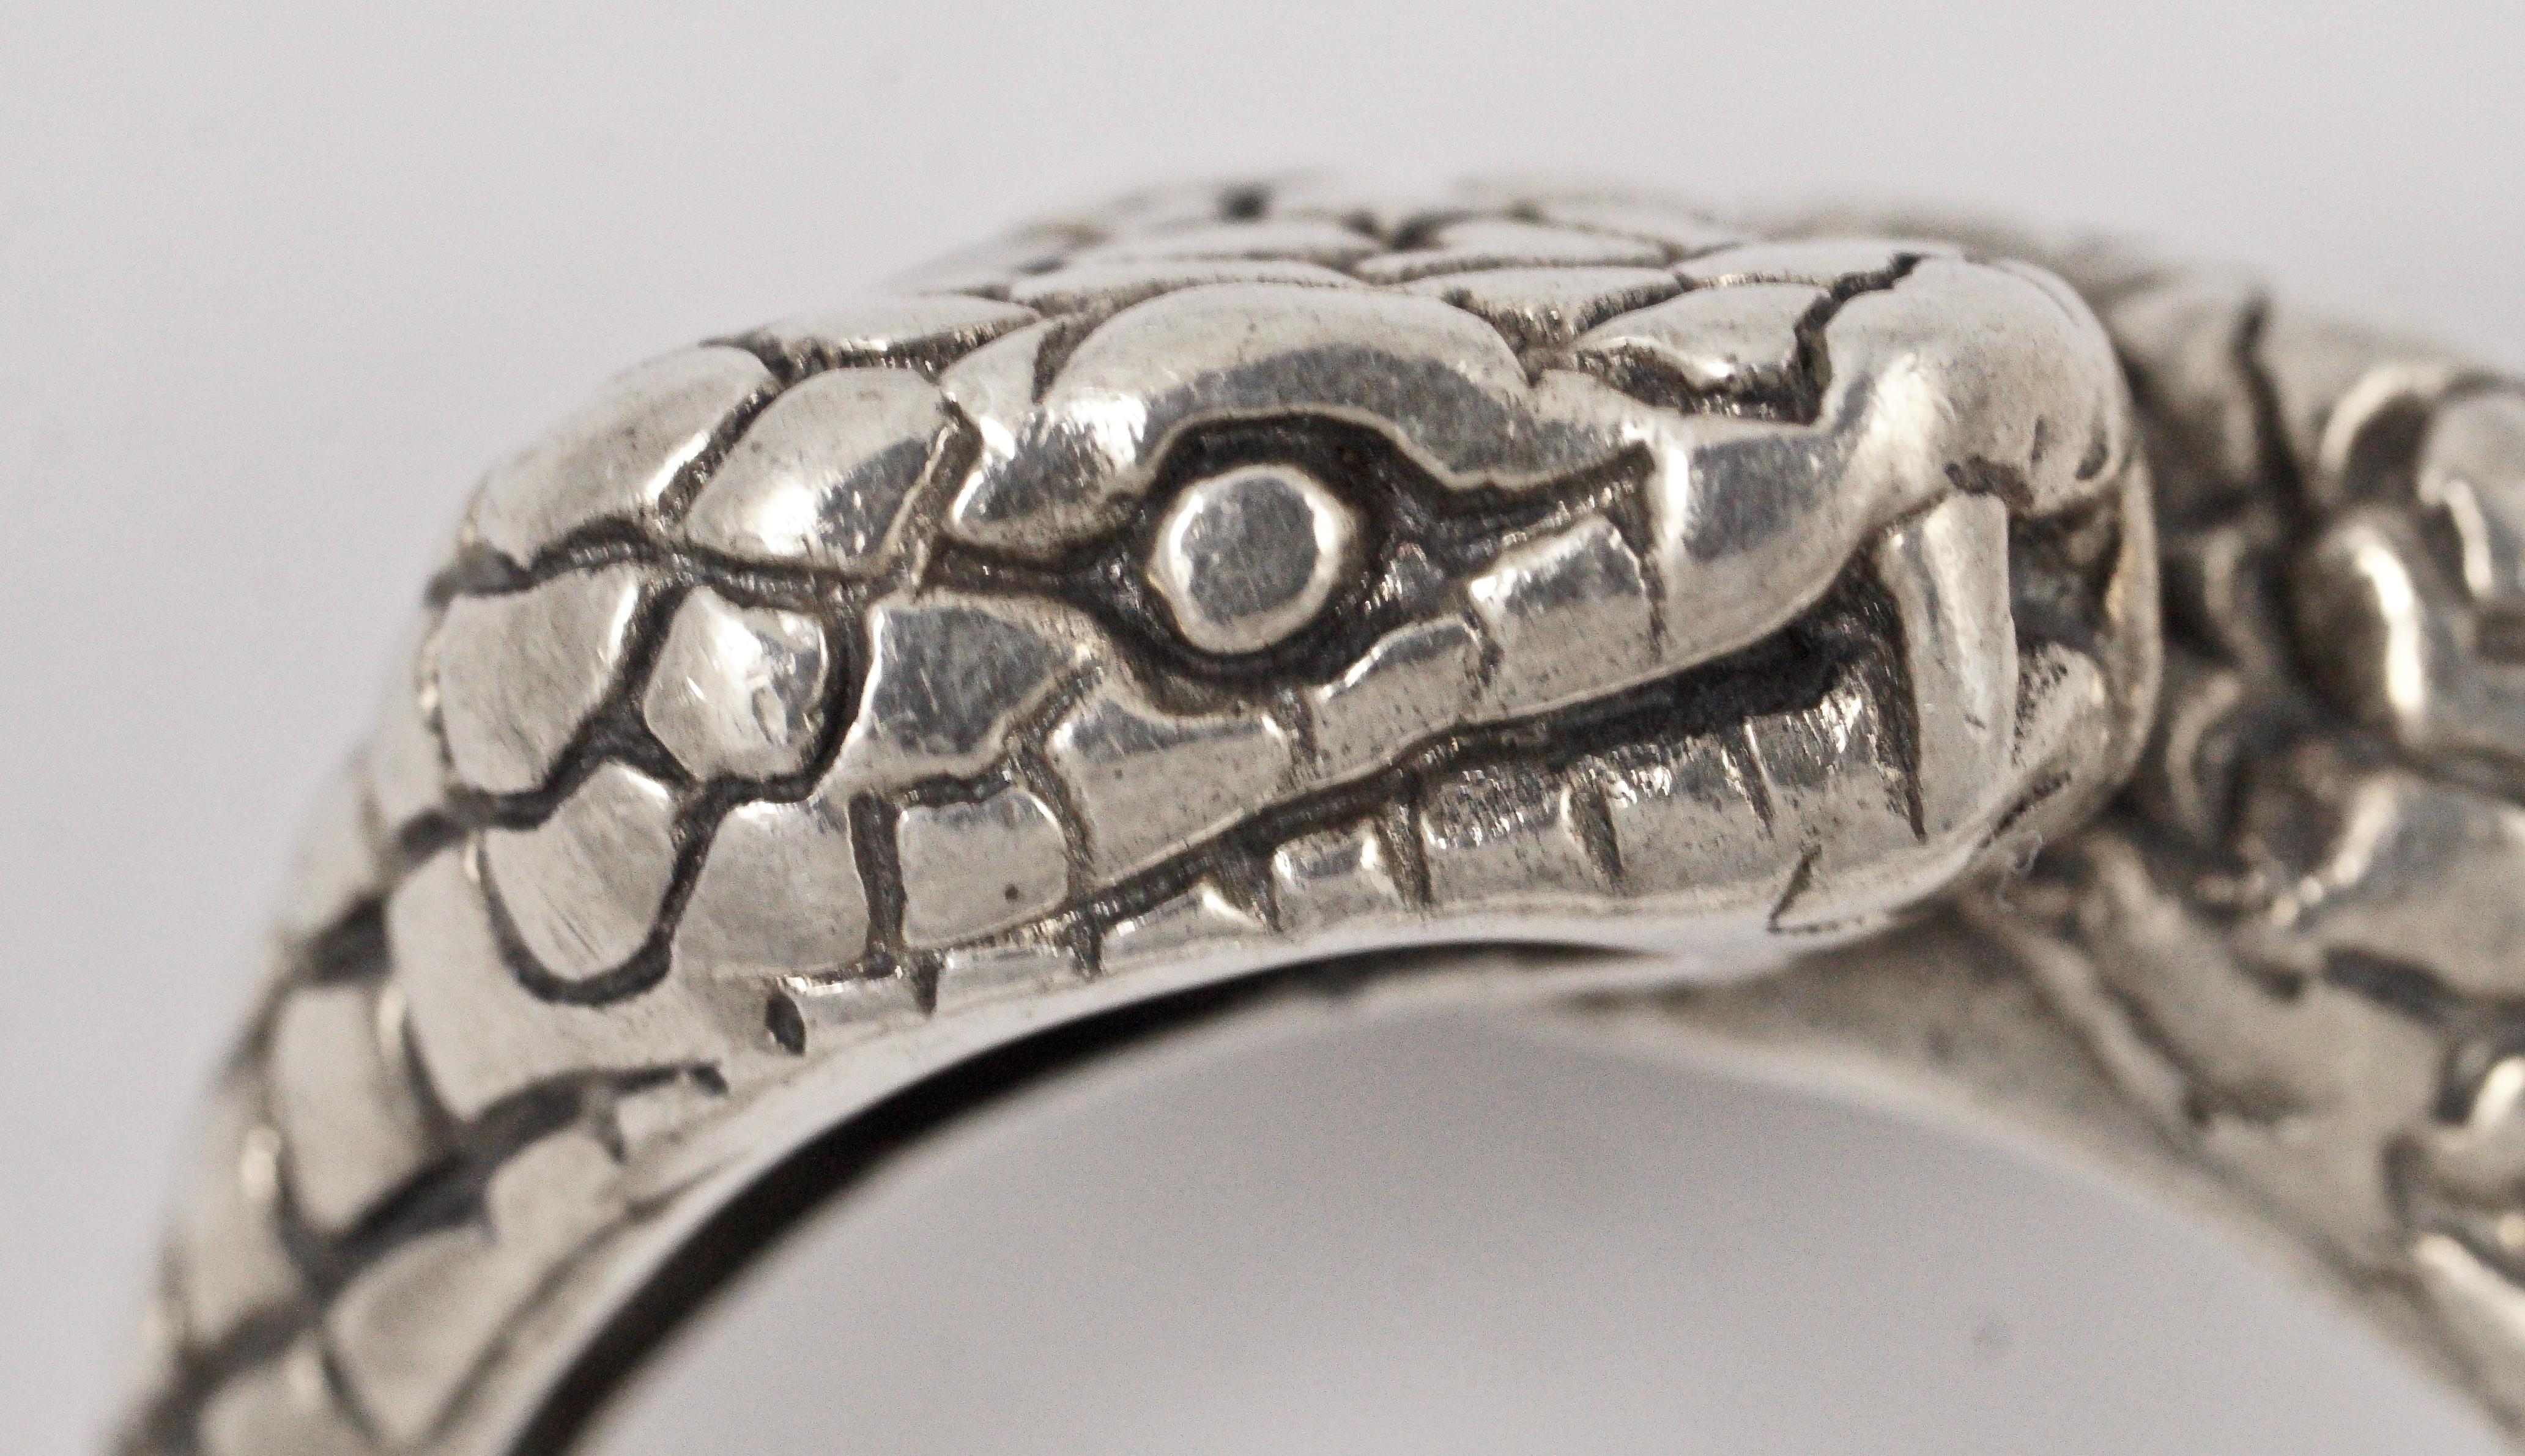 Vintage sterling silver ring featuring a wonderful etched double cobra snake design. Ring size UK T / US 9 5/8, and the cobra heads are each approximately 1cm / .39 inch wide, and depth .5cm / .19 inch.

This is an unusual handmade snake ring with